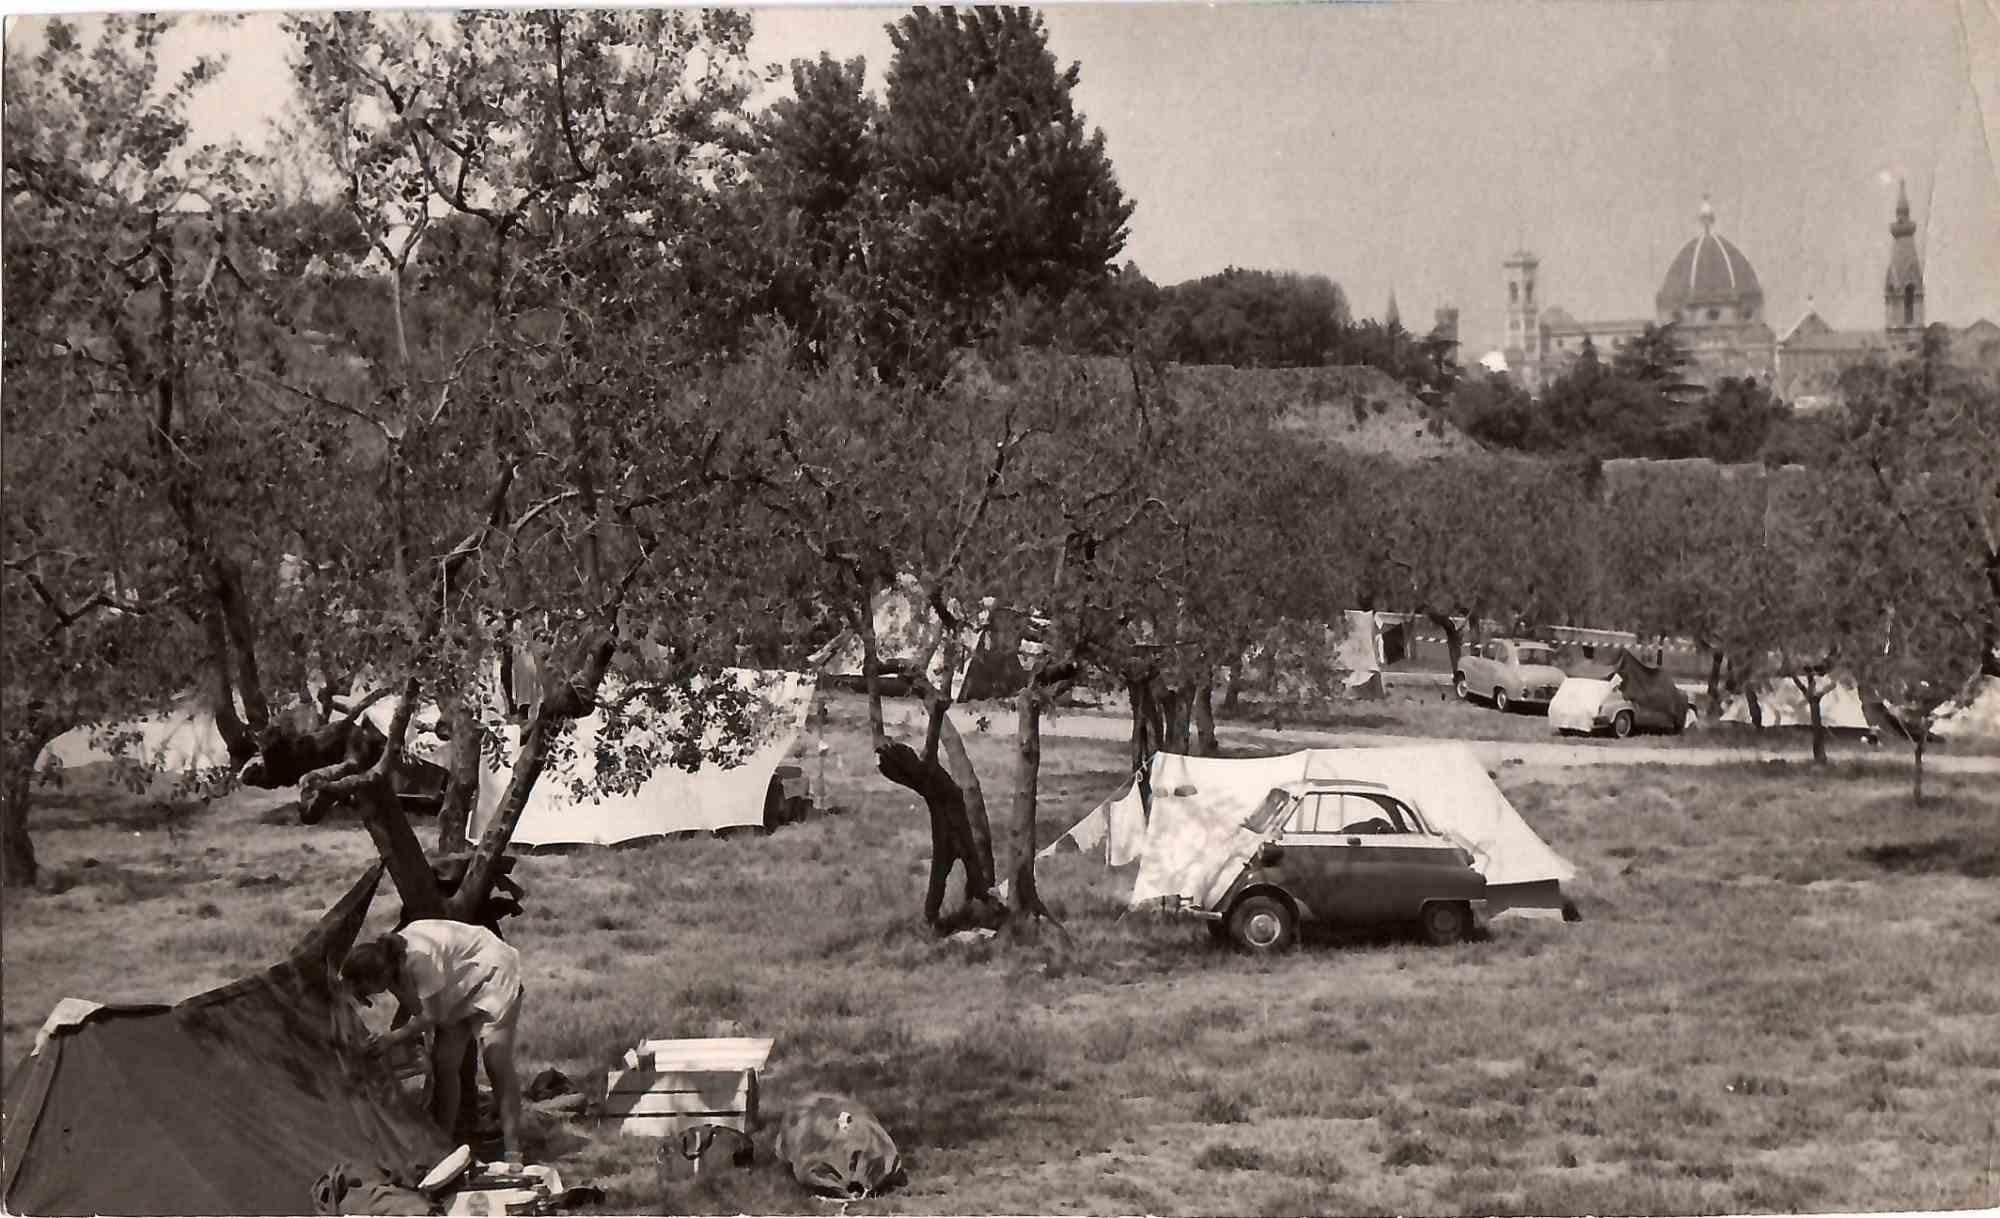 Unknown Black and White Photograph - Camping in the 1960s - Vintage Photograph - 1960s